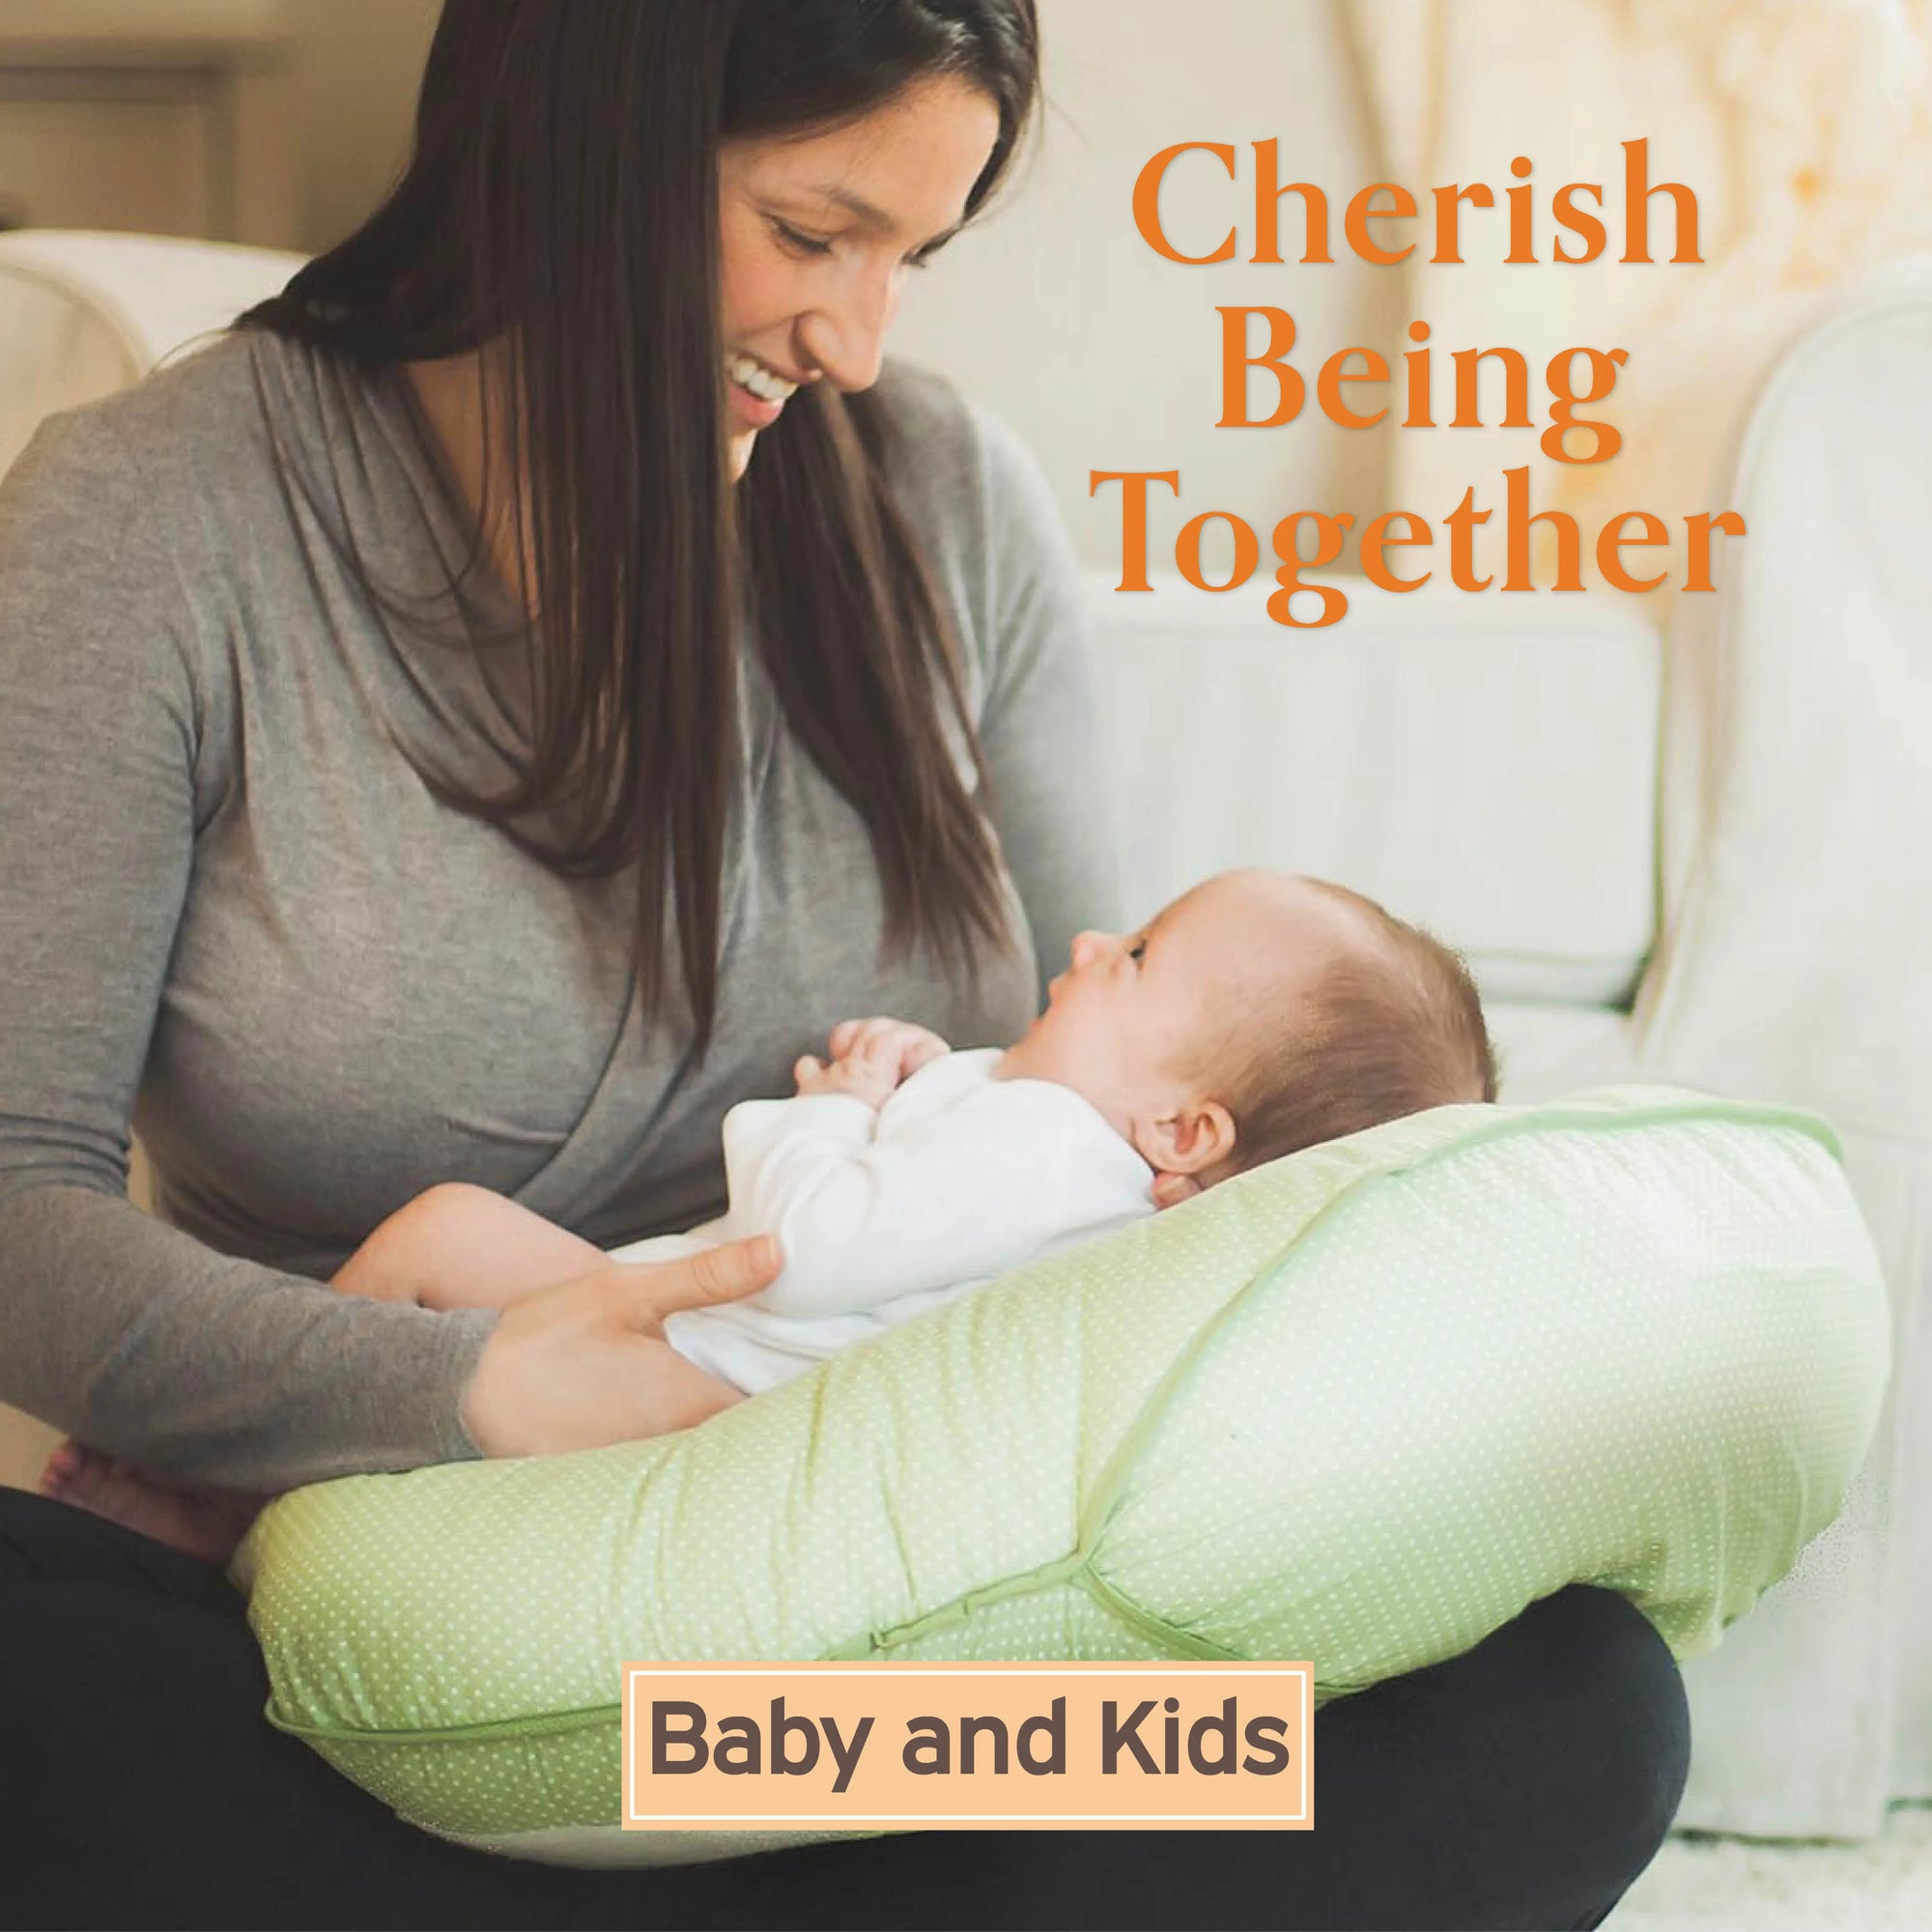 Cherish Being Together Baby and Kids with Cuddle-U in Green Pin Dot